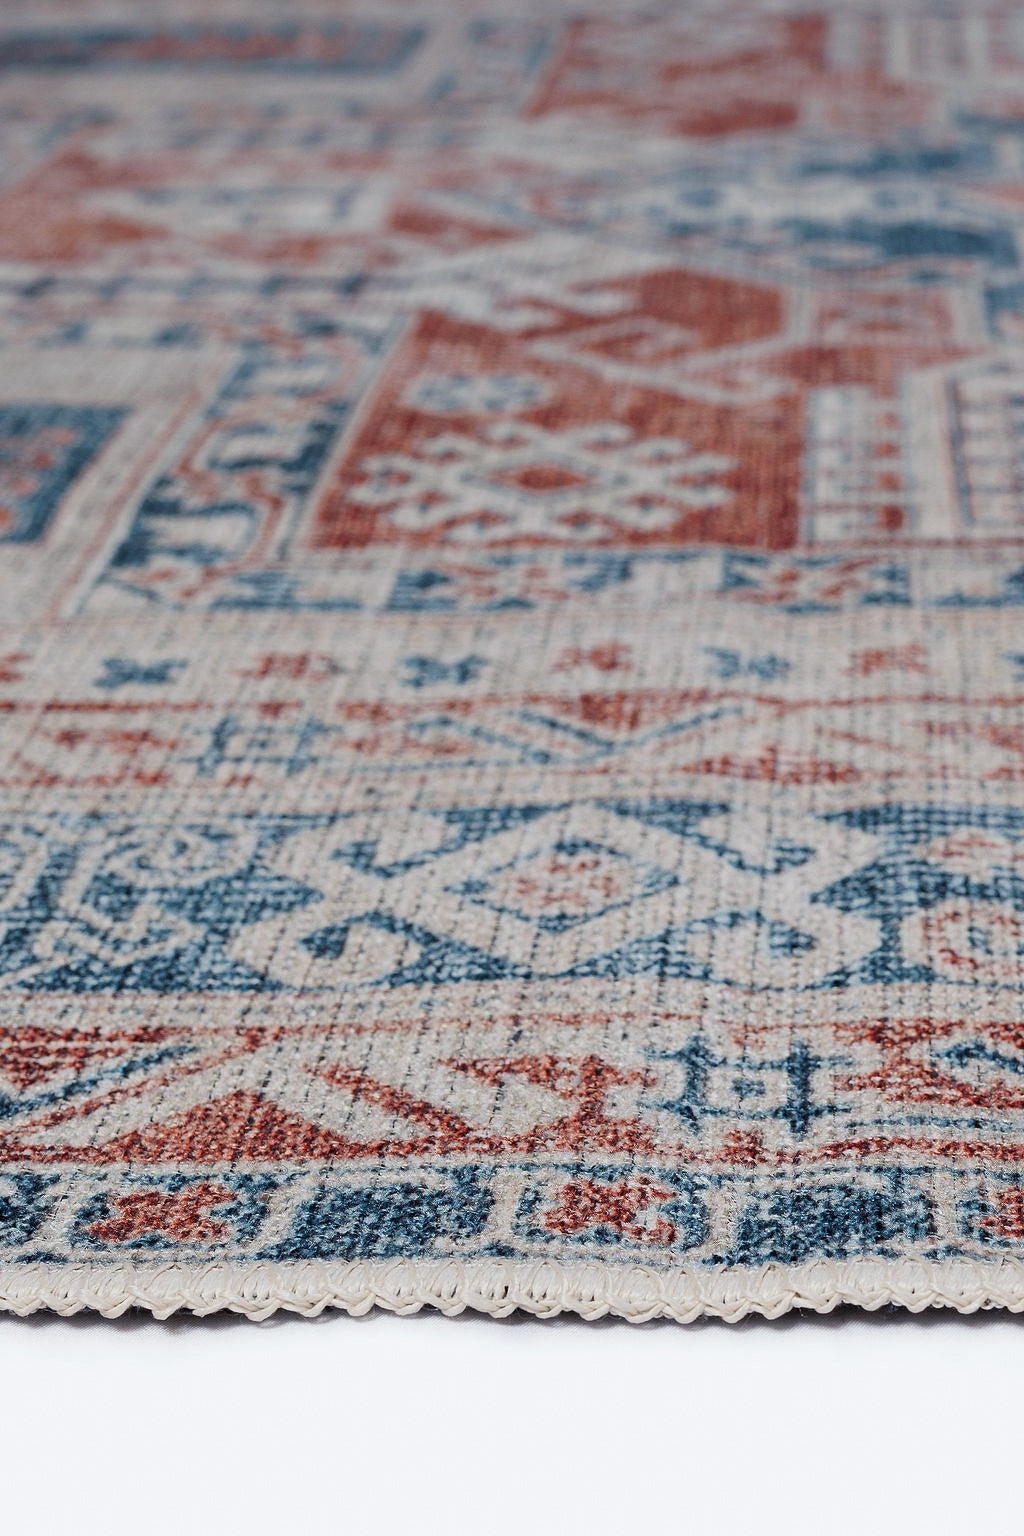 Blue and red bordered vintage style rug